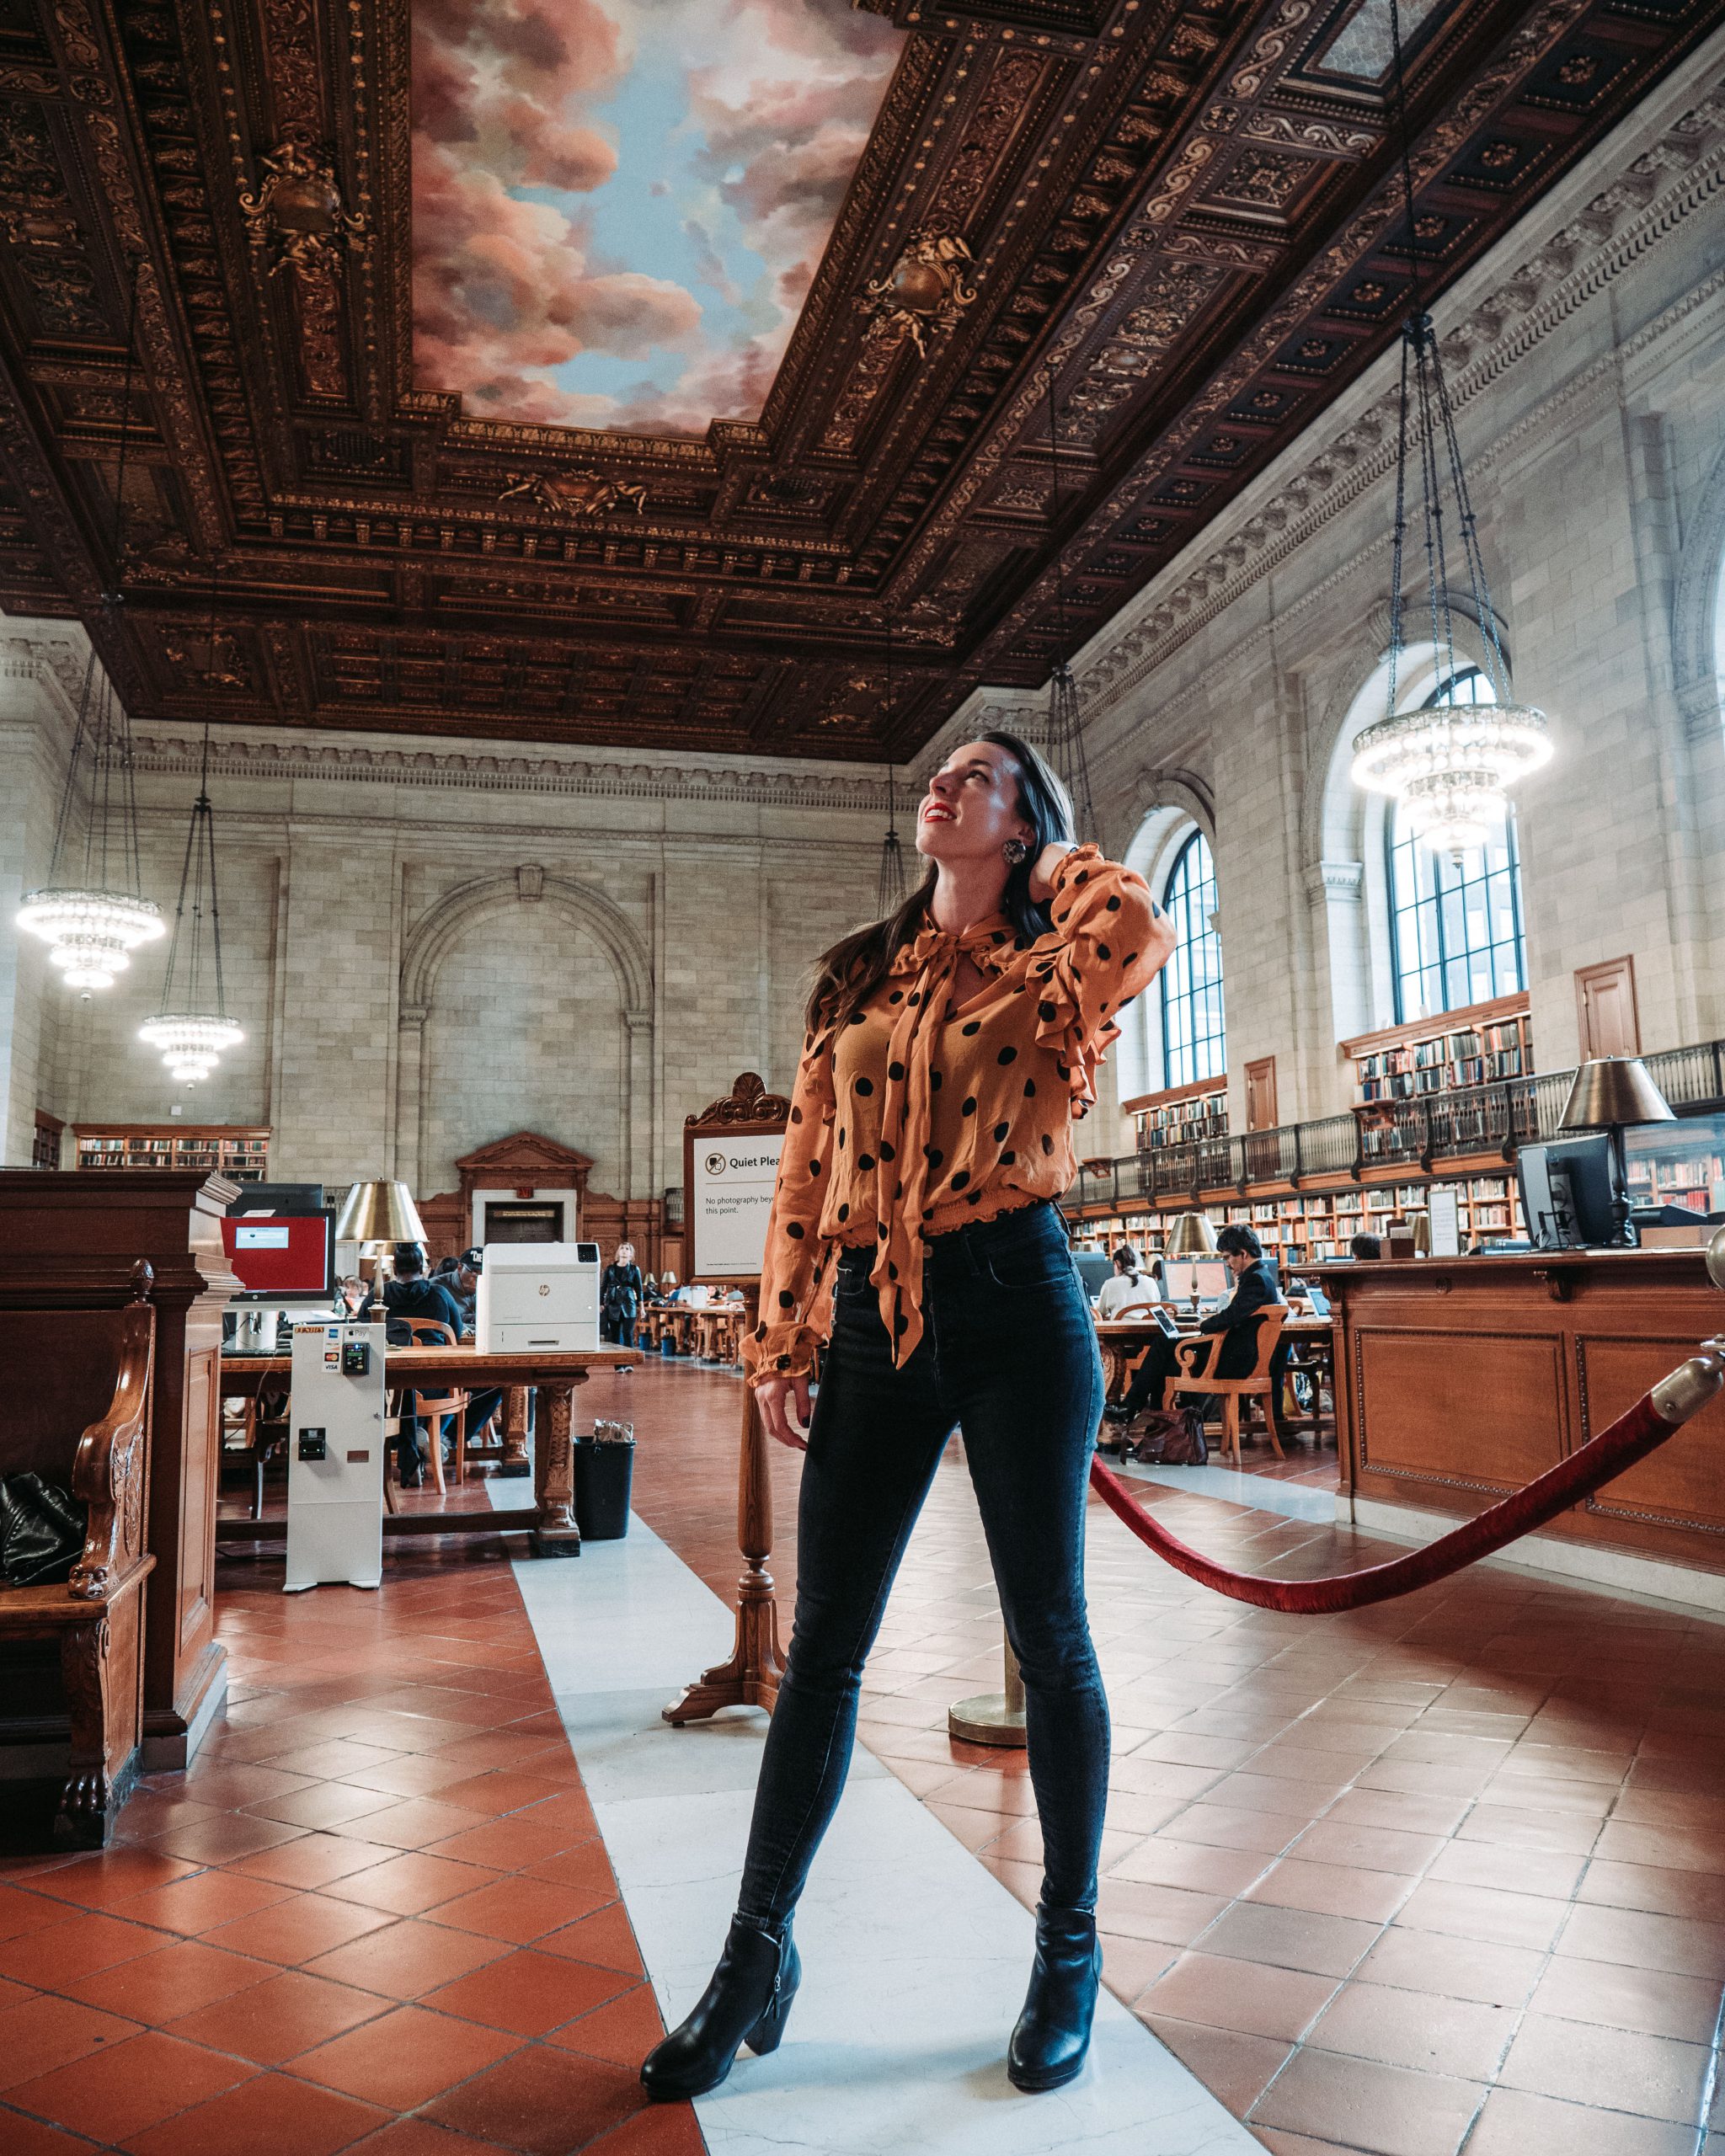 Sarah in the New York Public Library